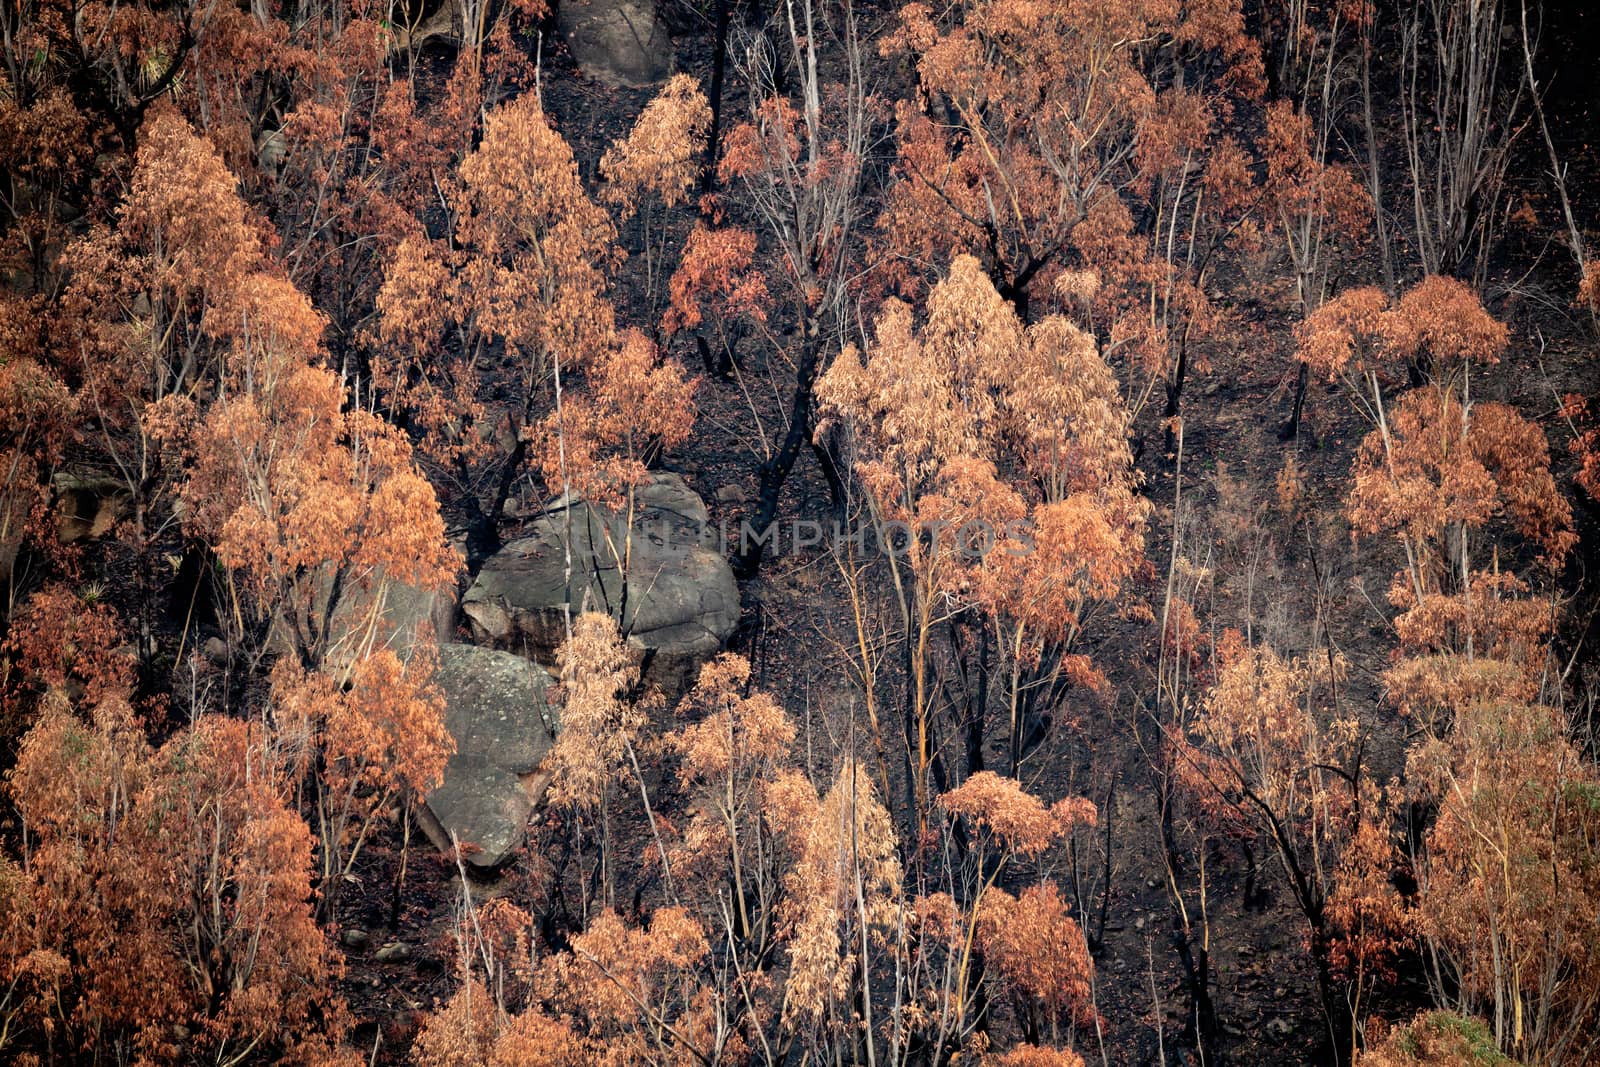 Looking down onto burnt bush land after the bush fires came through the area.  The fire has charred the ground and blackened the tree trunks but the leaves on the trees have only browned.  Blades of green grass are already showing days later.